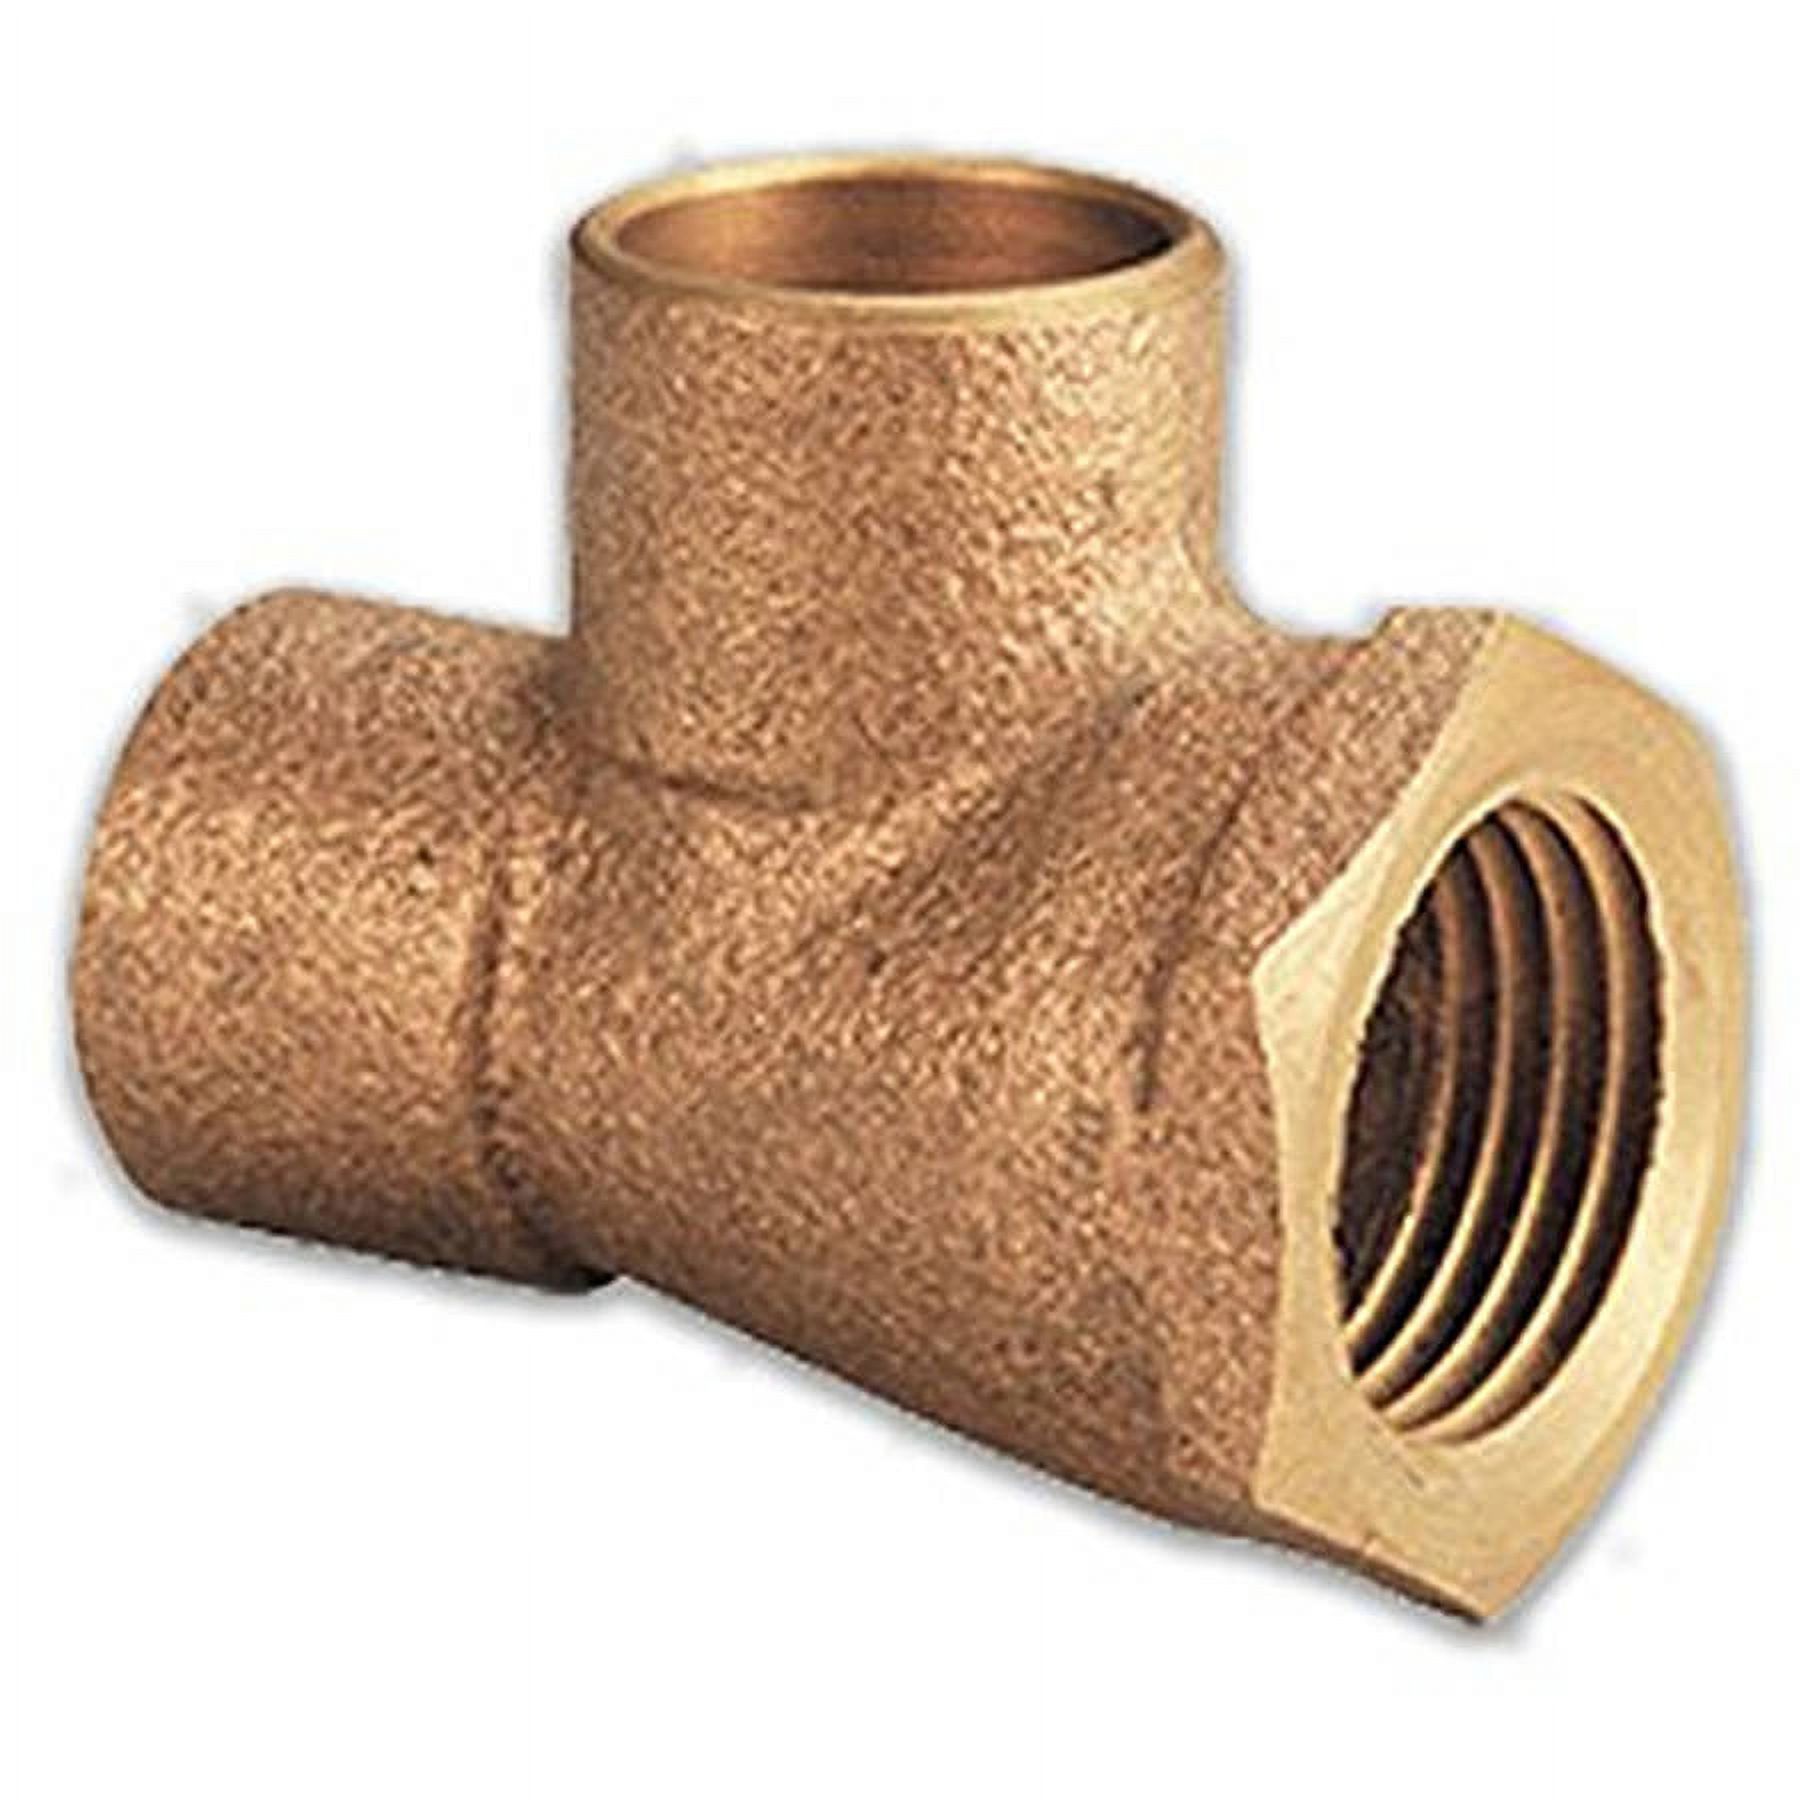 Supply Giant CCFT1213-NL CXCXF Lead Free Cast Brass Tee Fitting with Solder Cups and Female Threaded Branch, 1-1/2" x 1-1/2" x 3/4" - image 1 of 6